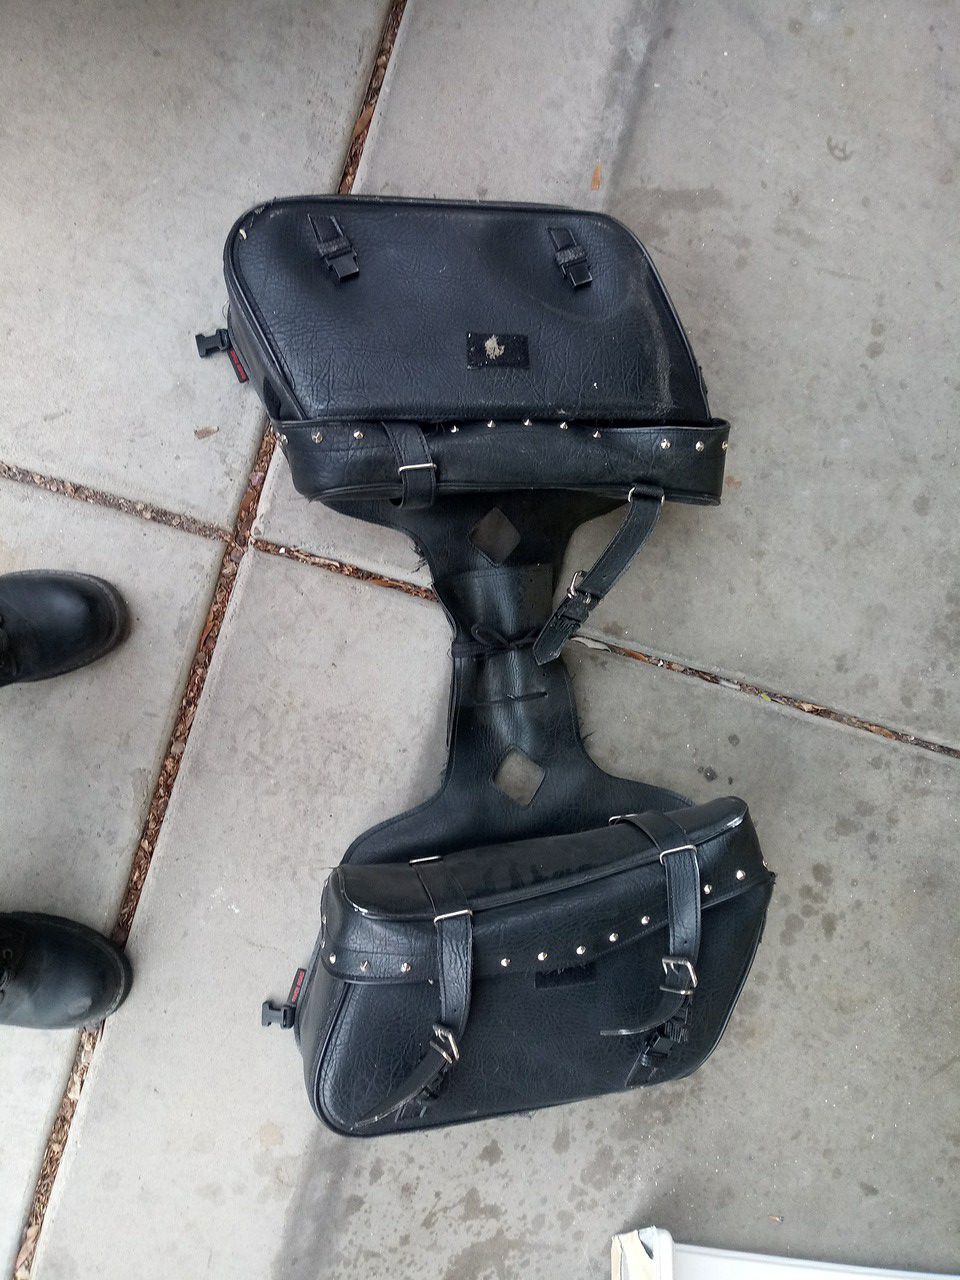 Saddle bags, damage from sitting on pipe. Used a couple times